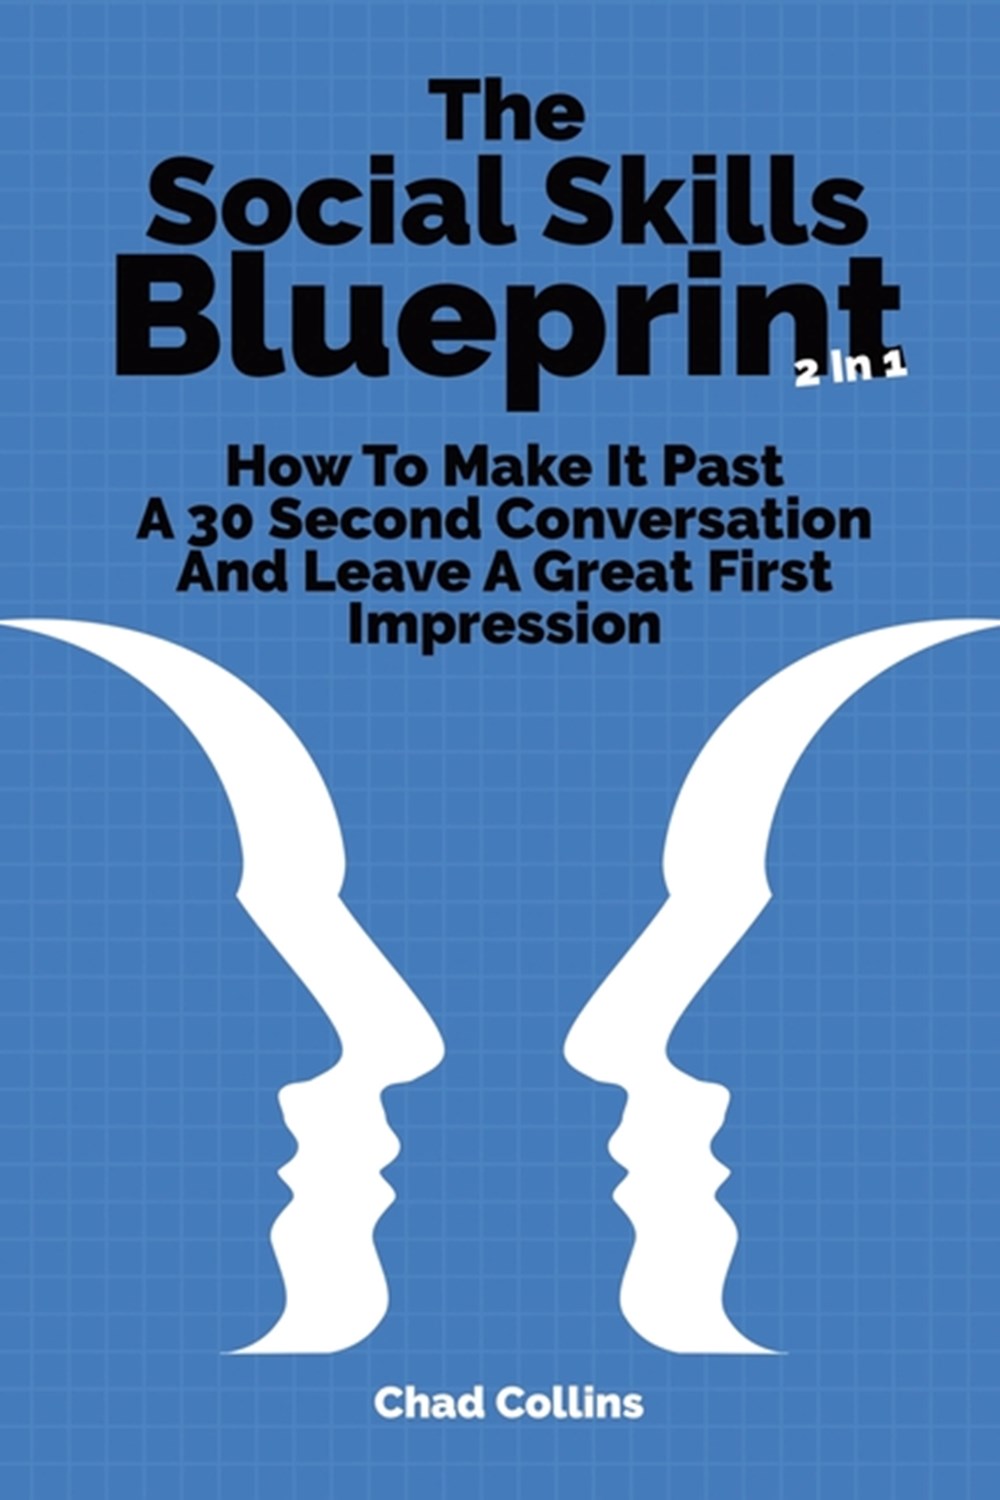 Social Skills Blueprint 2 In 1: How To Make It Past A 30 Second Conversation And Leave A Great First